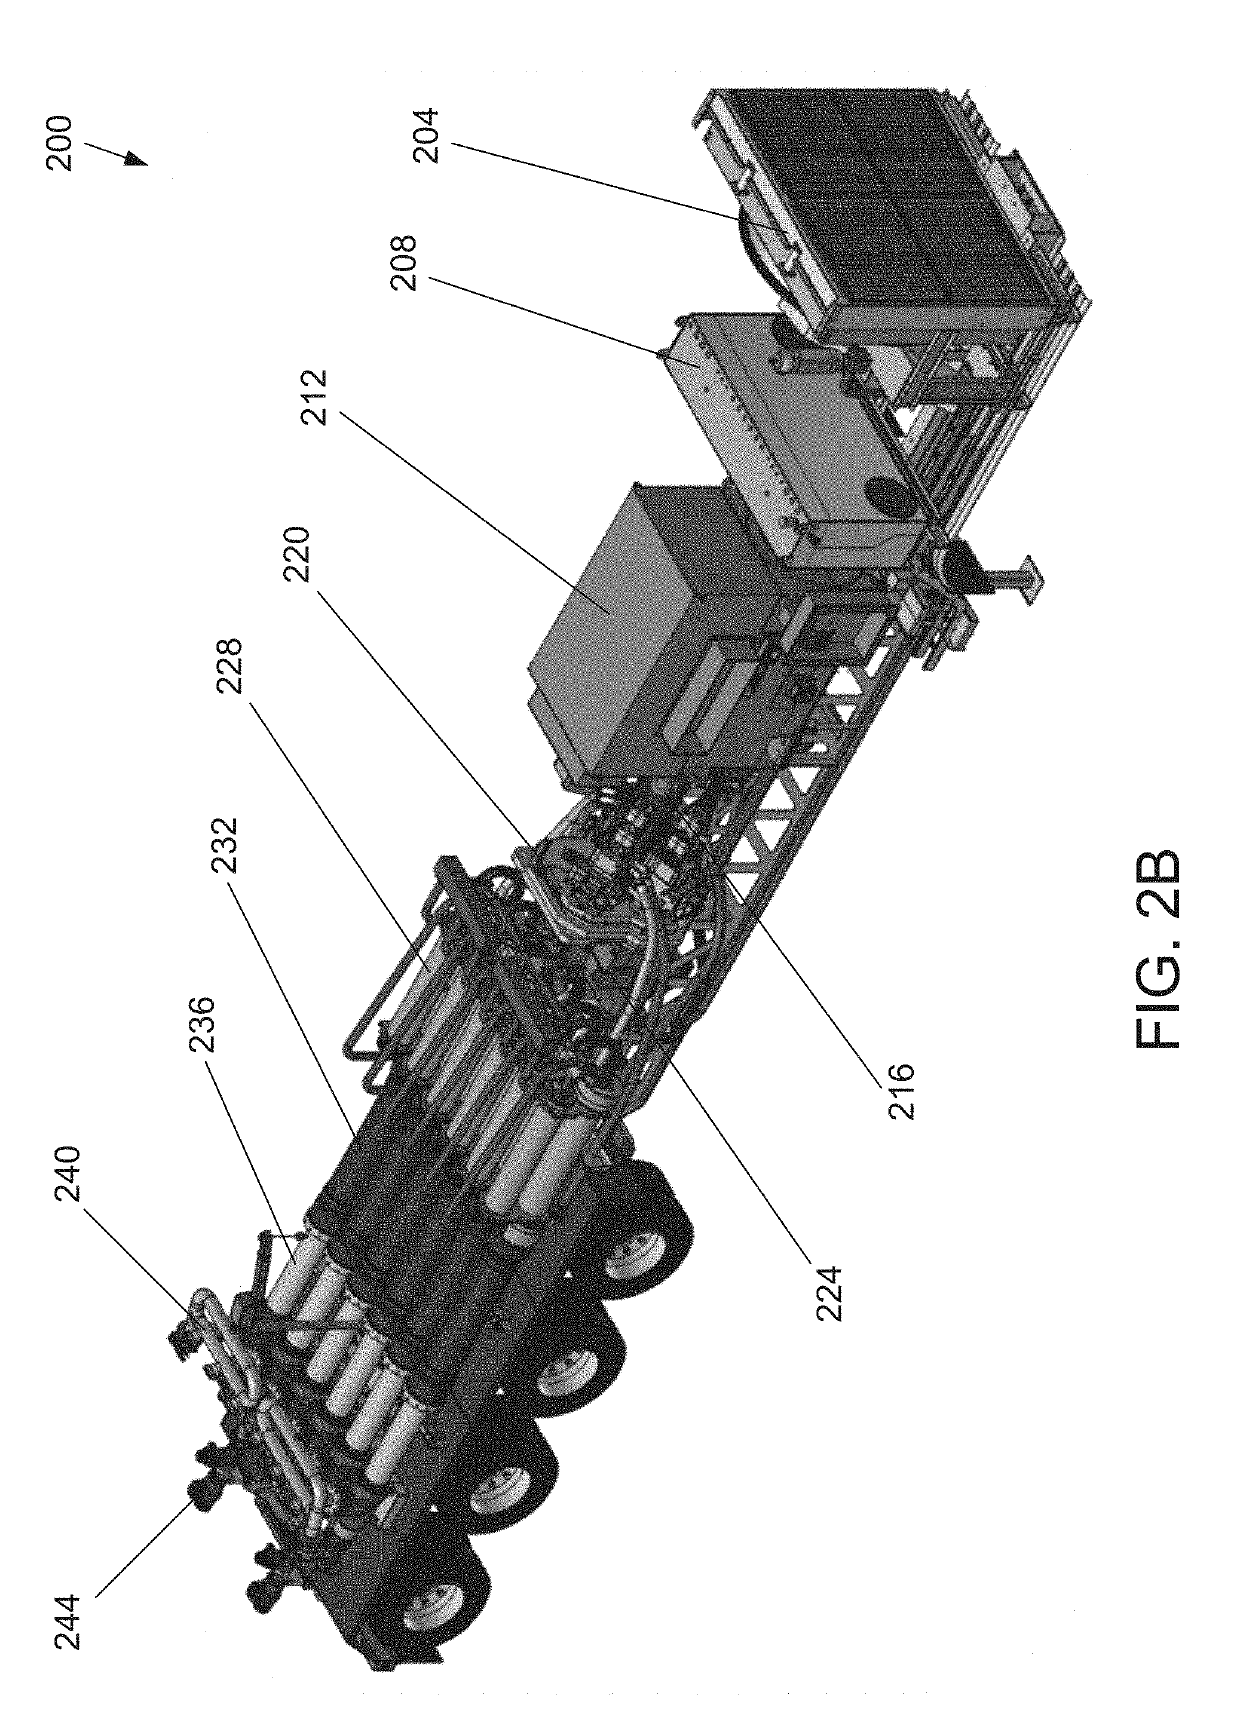 Well service pump power system and methods